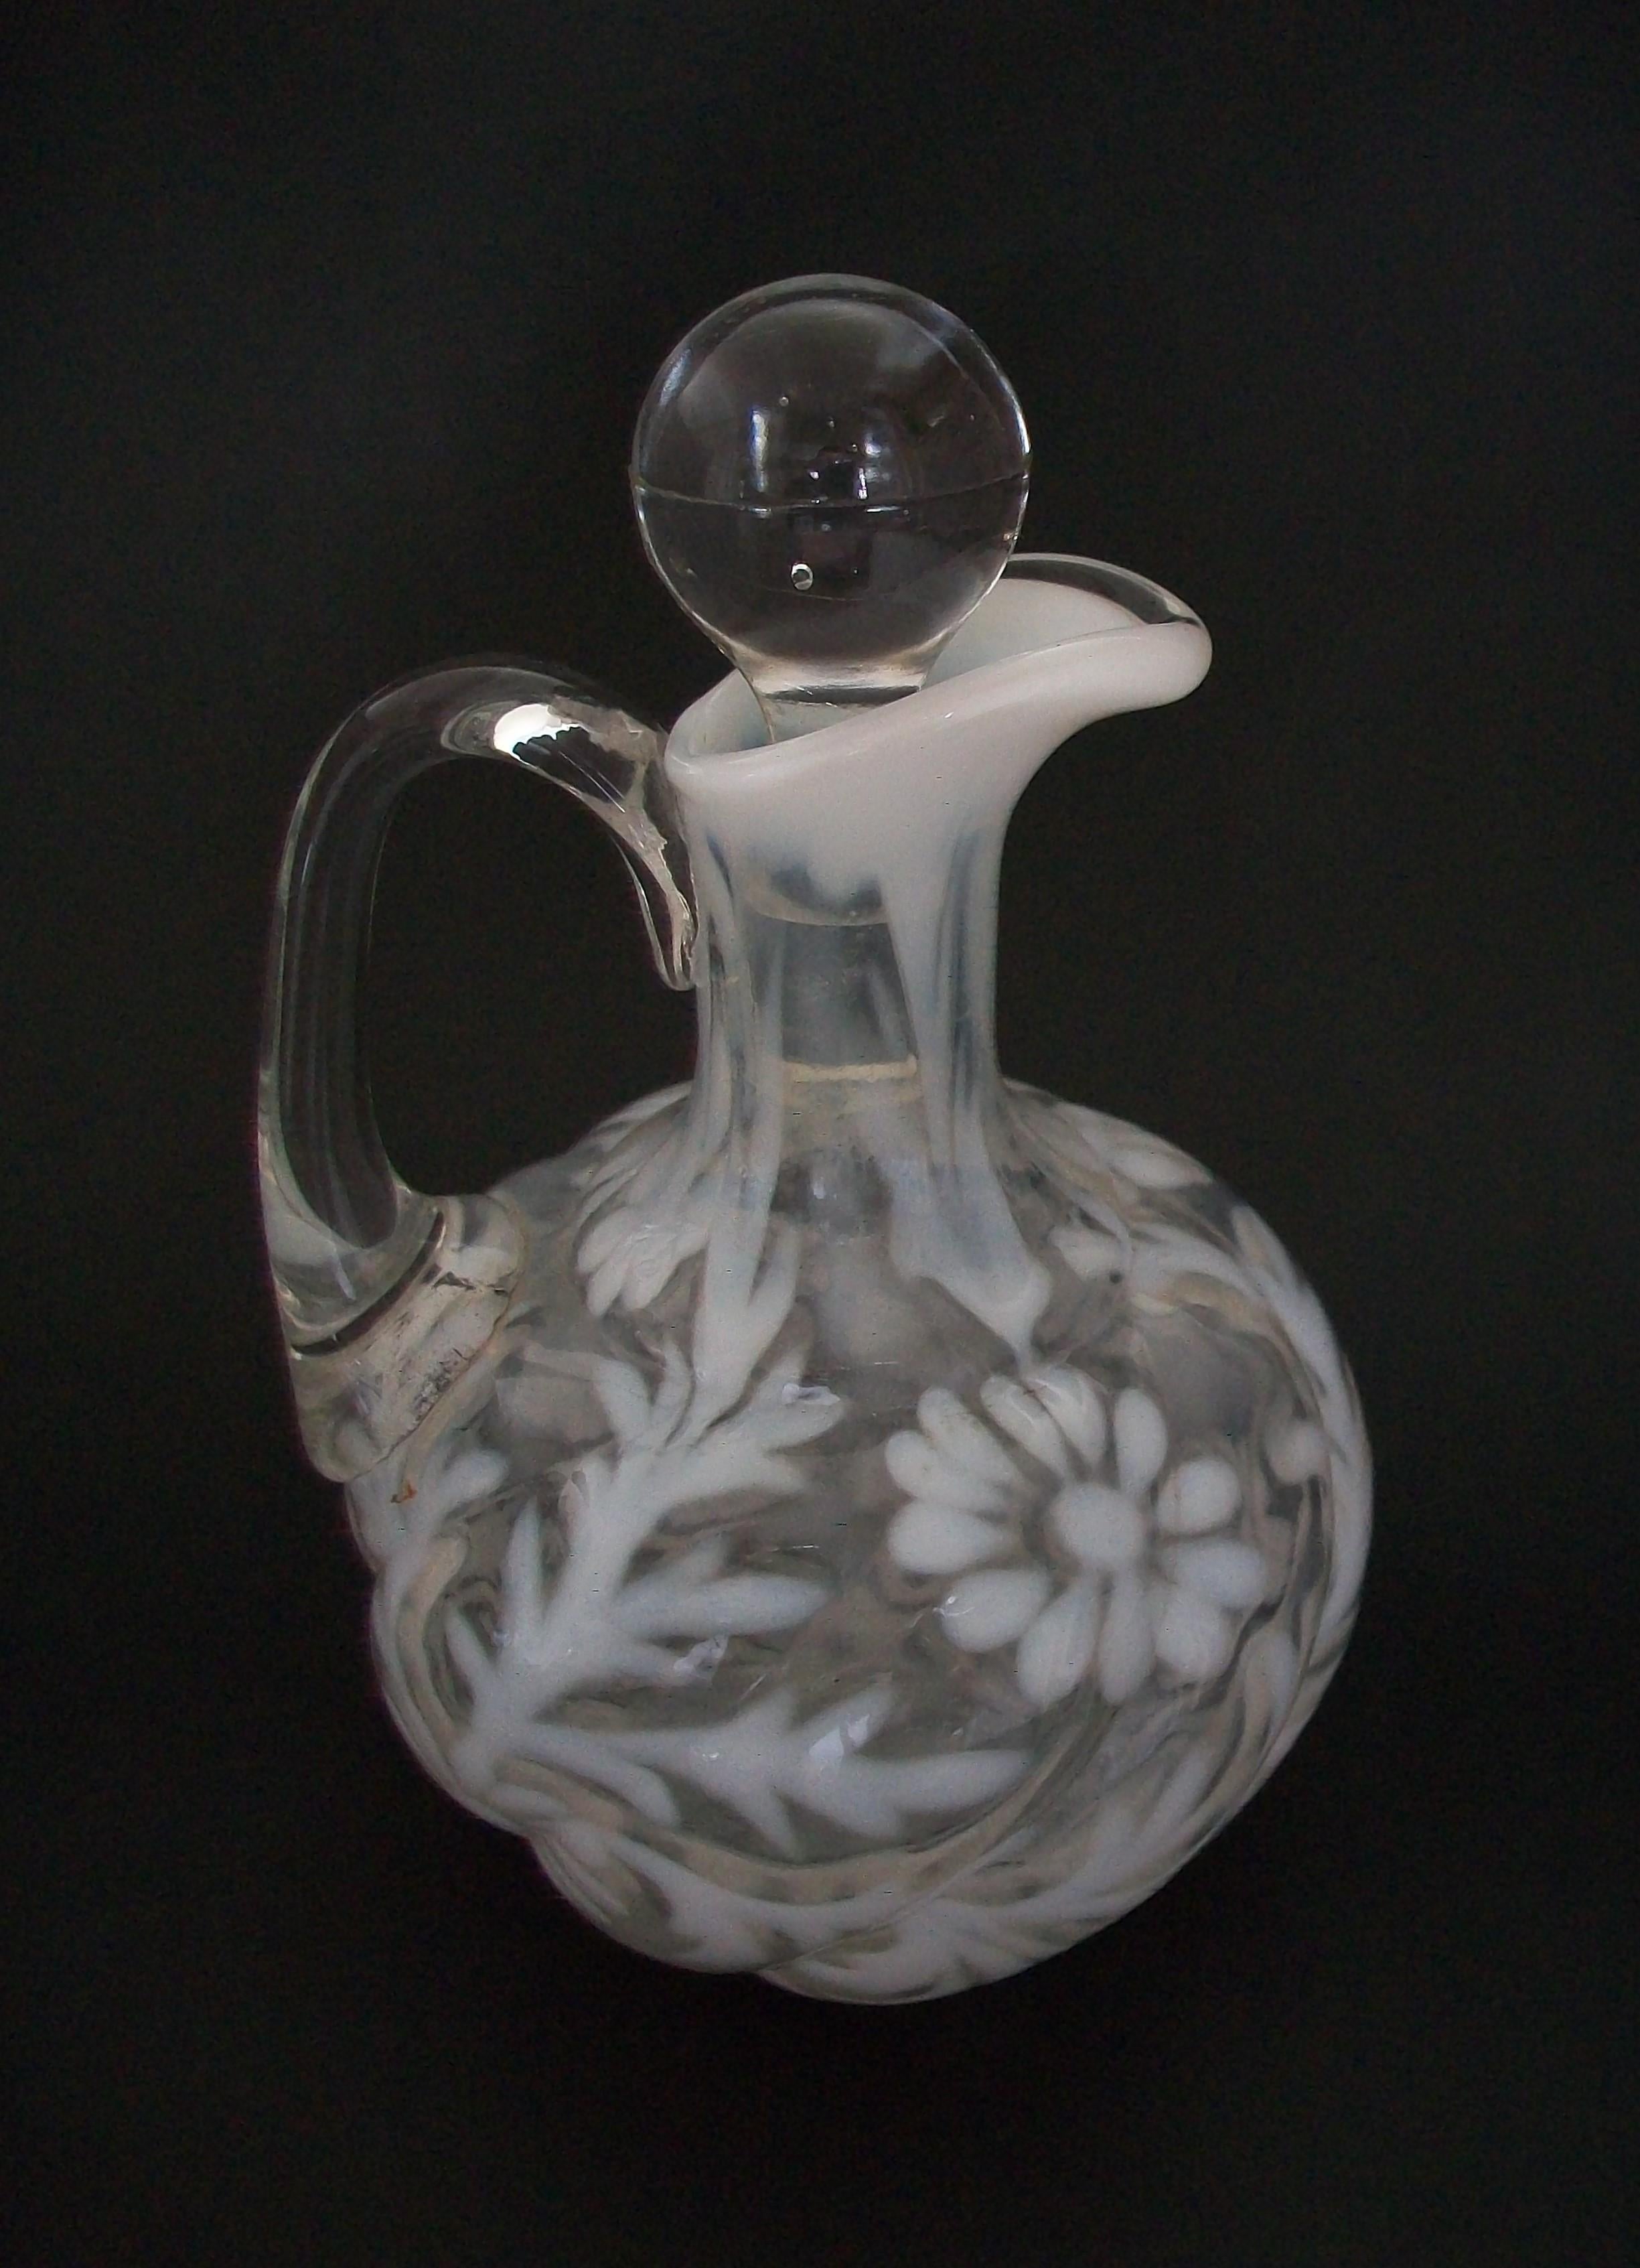 FENTON - 'Daisy & Fern' - Antique opalescent and clear glass cruet - mold blown body - hand made clear pulled glass handle - clear molded stopper (appears to be original - tight fitting) - unsigned - United States - circa 1890.

Excellent antique